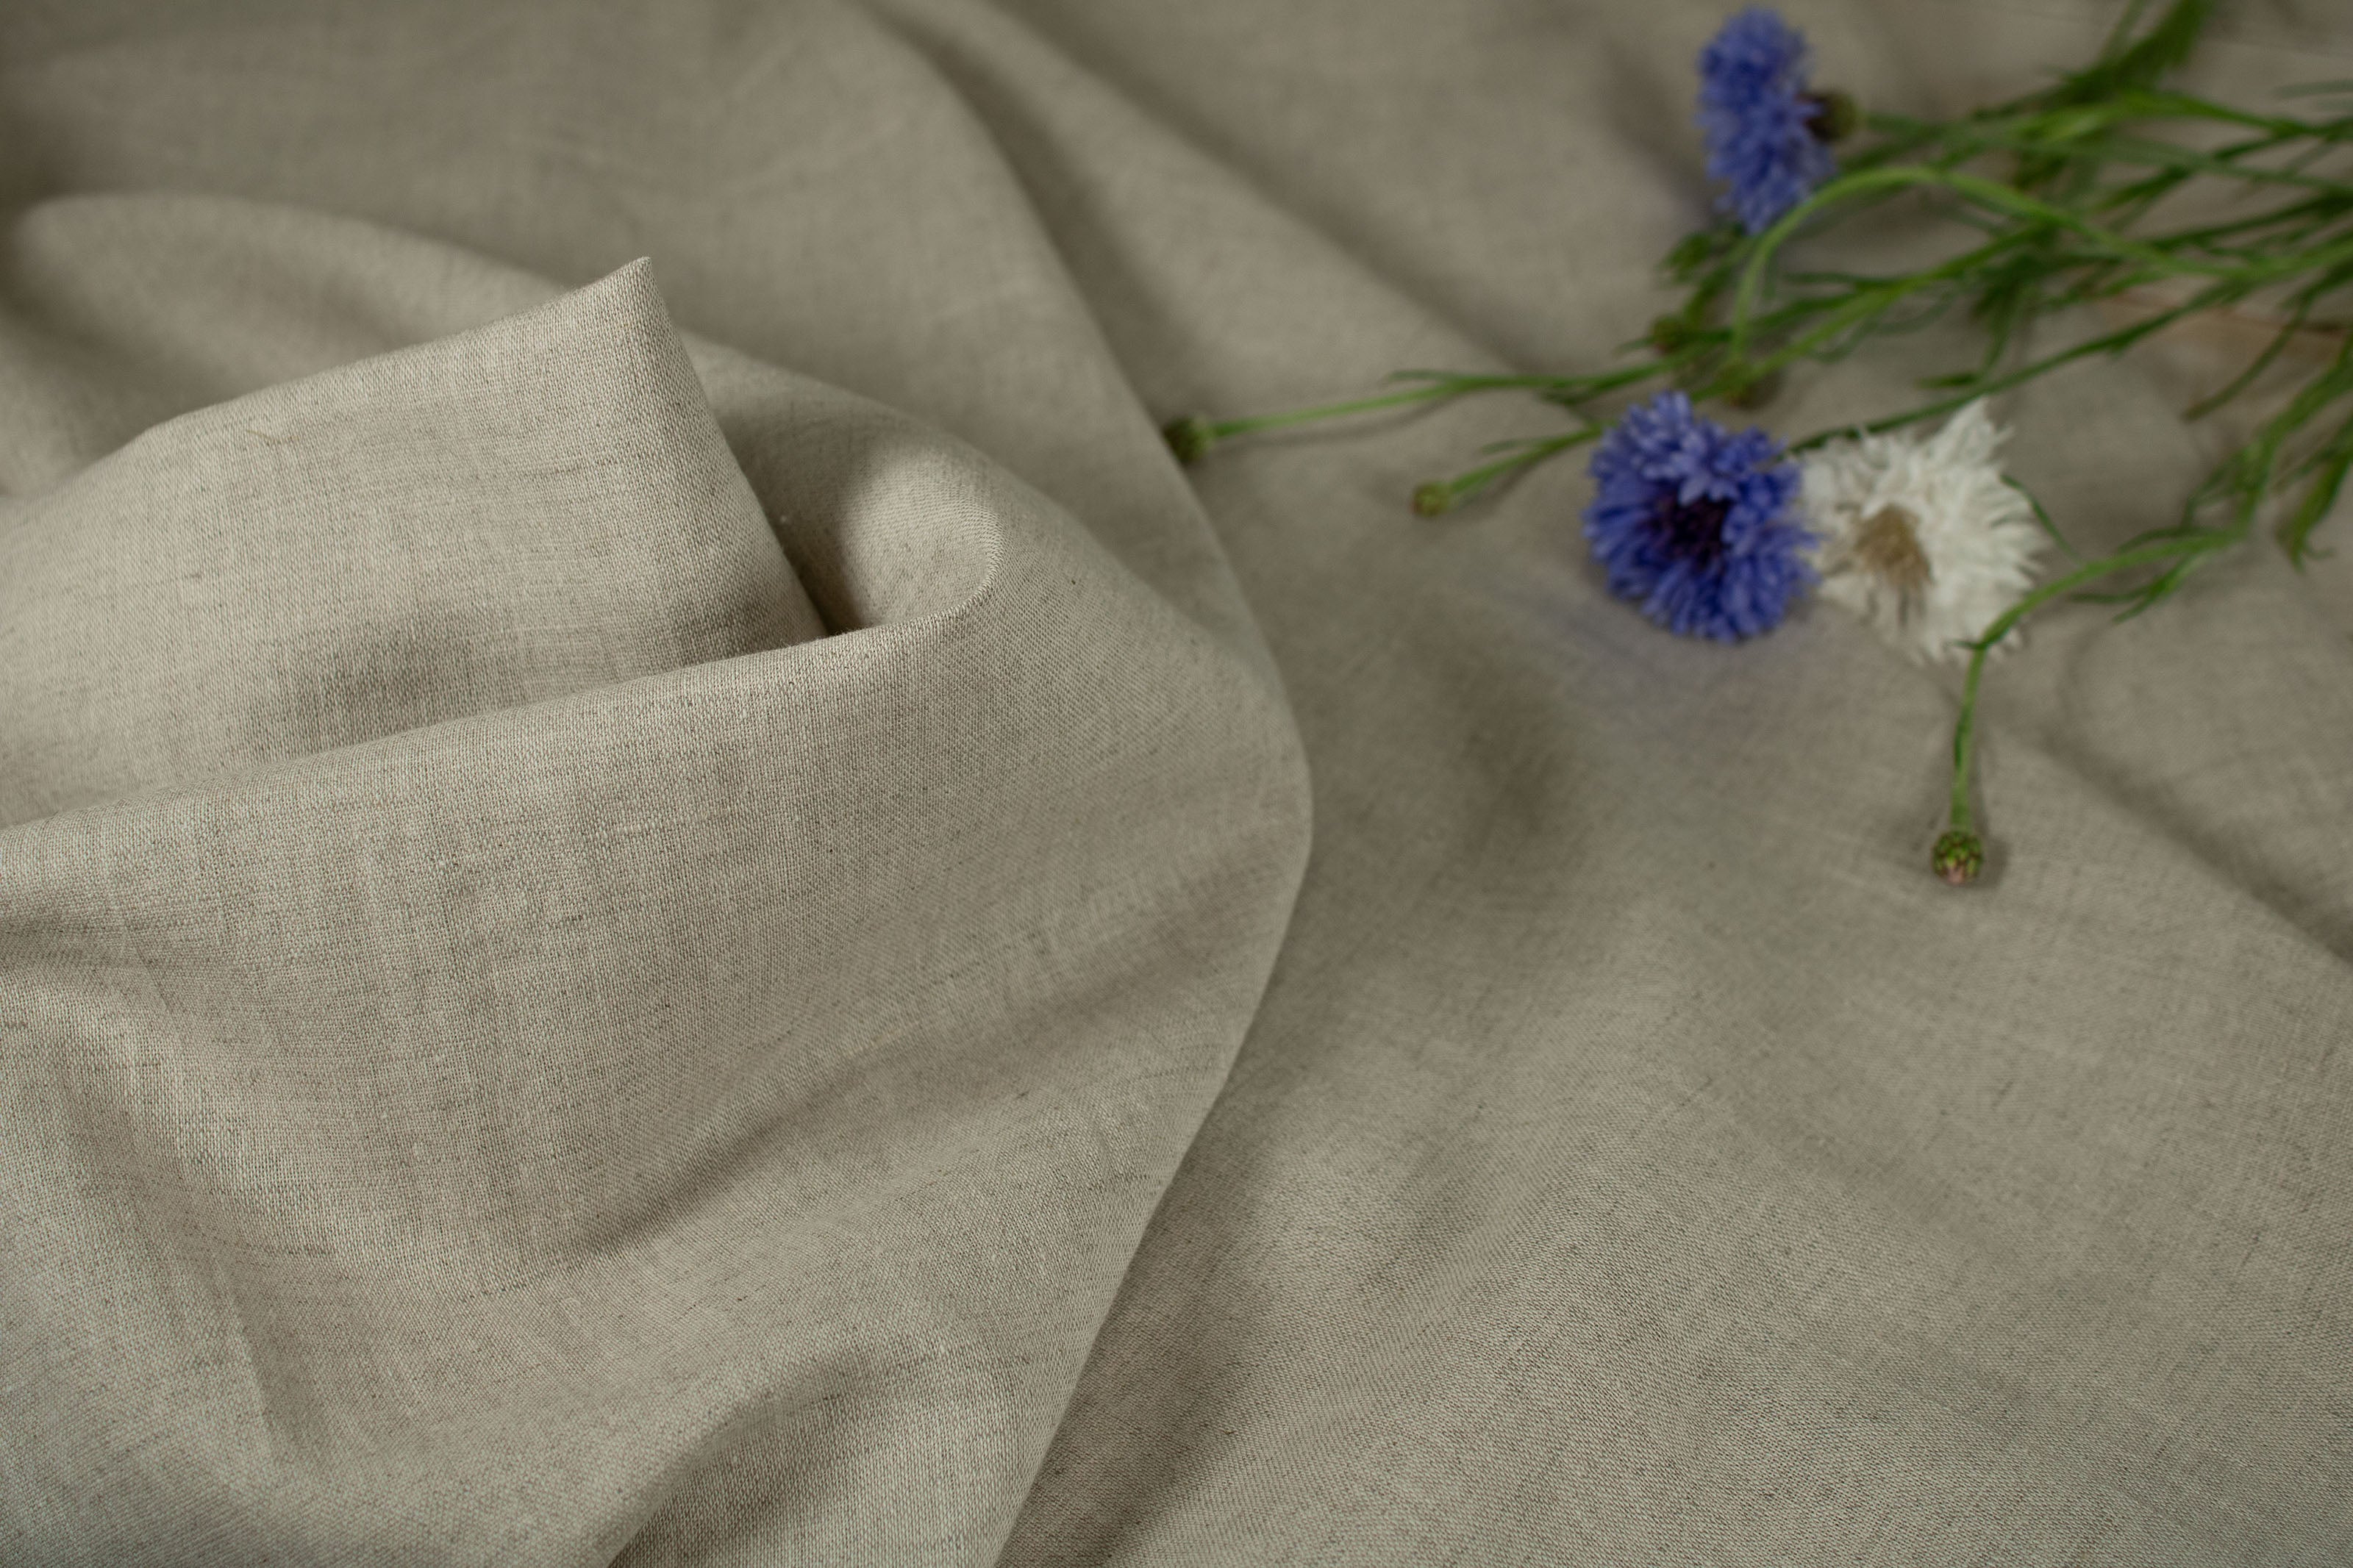 Linen Blend Fabric by the Yard / Flax cotton fabric / Buy Linen Fabric Online